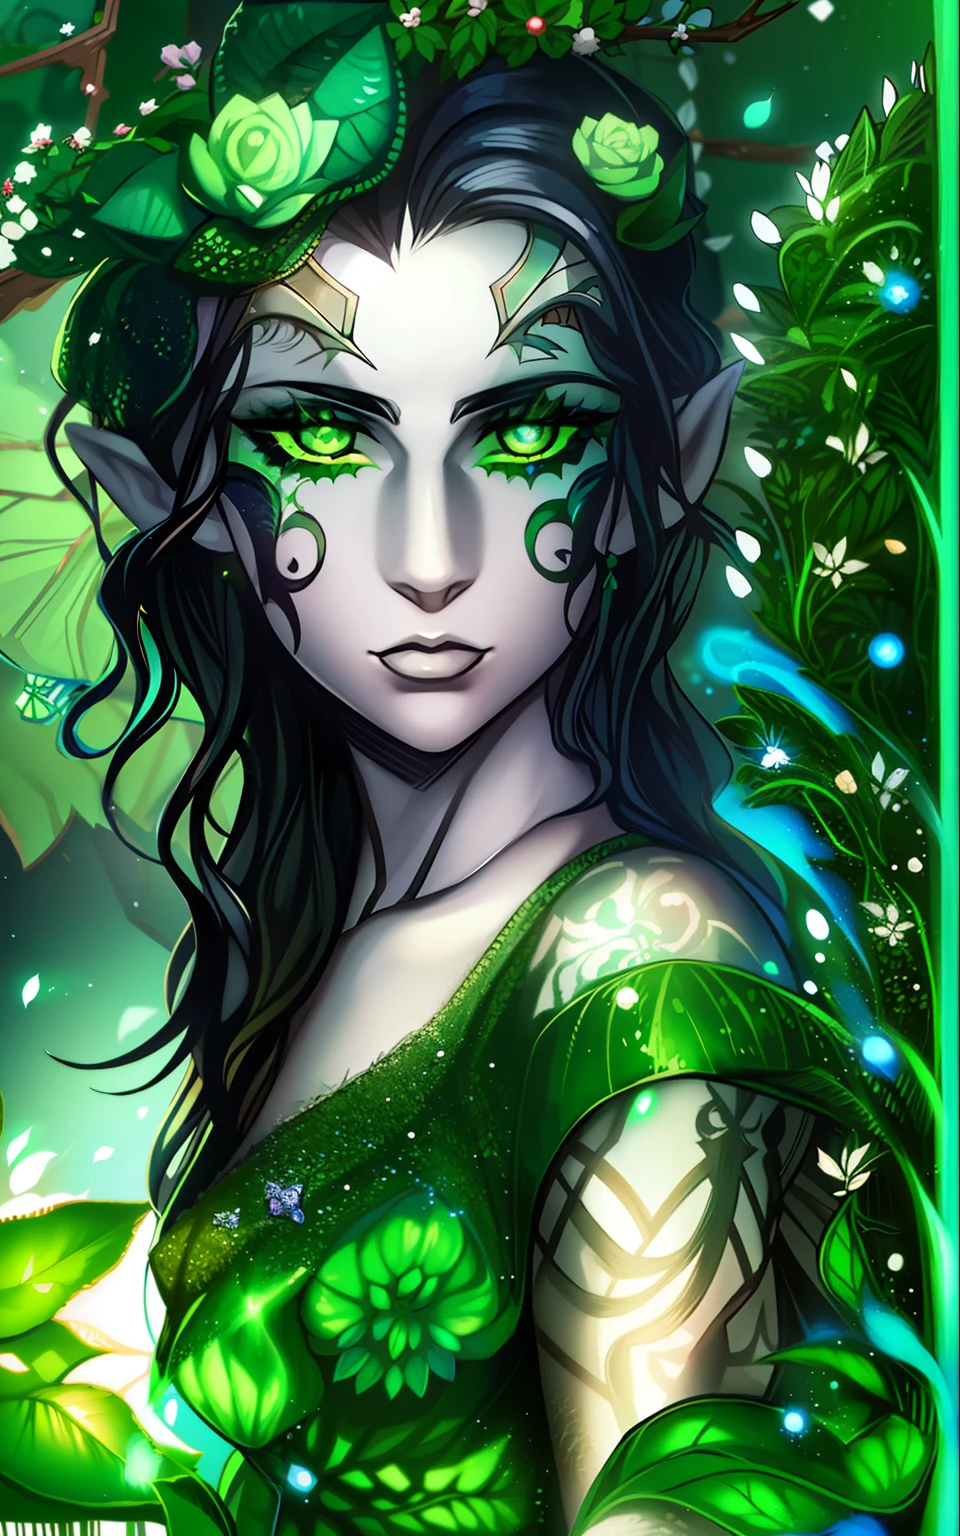 an elf with pale white skin, wavy black hair, green eyes, with green facial tattoos, wears a dress that seems to be made of plants